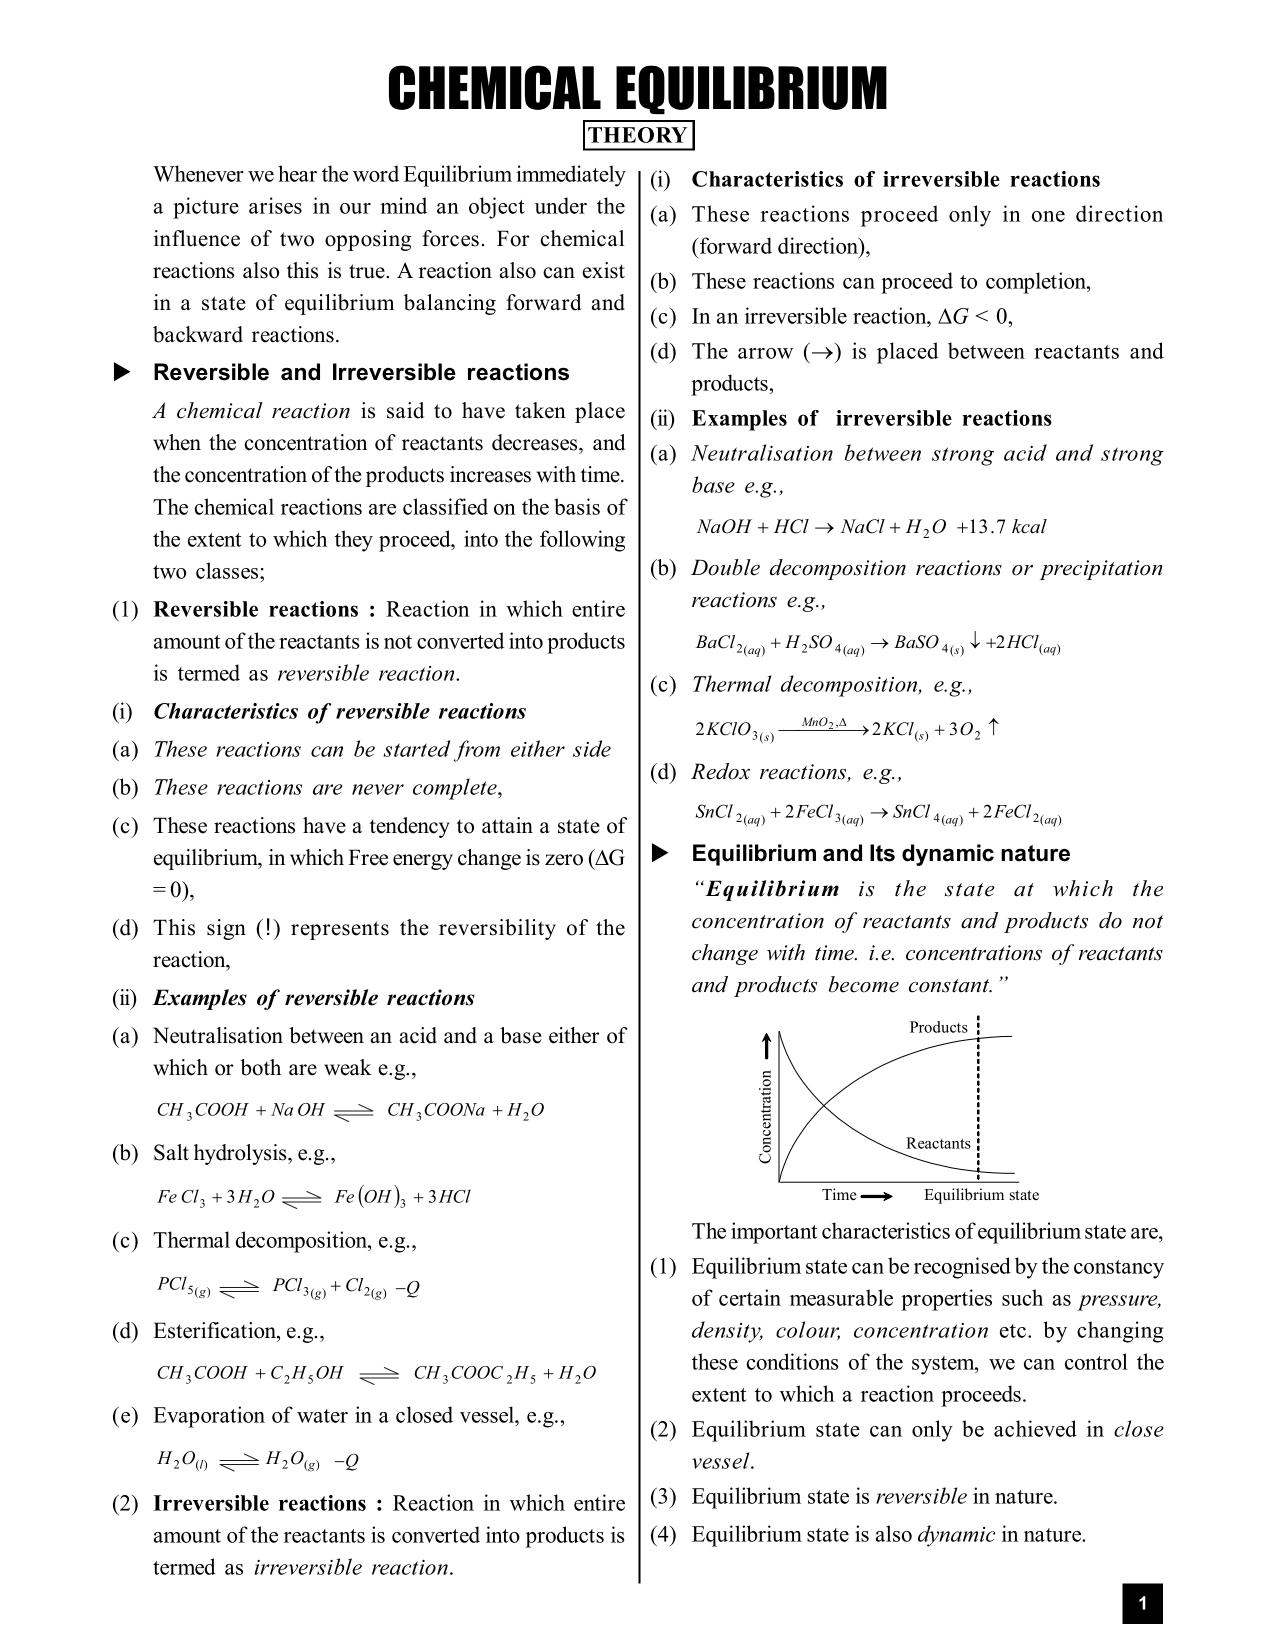 Chemical Equilibrium Short Notes for Class 11, JEE & NEET